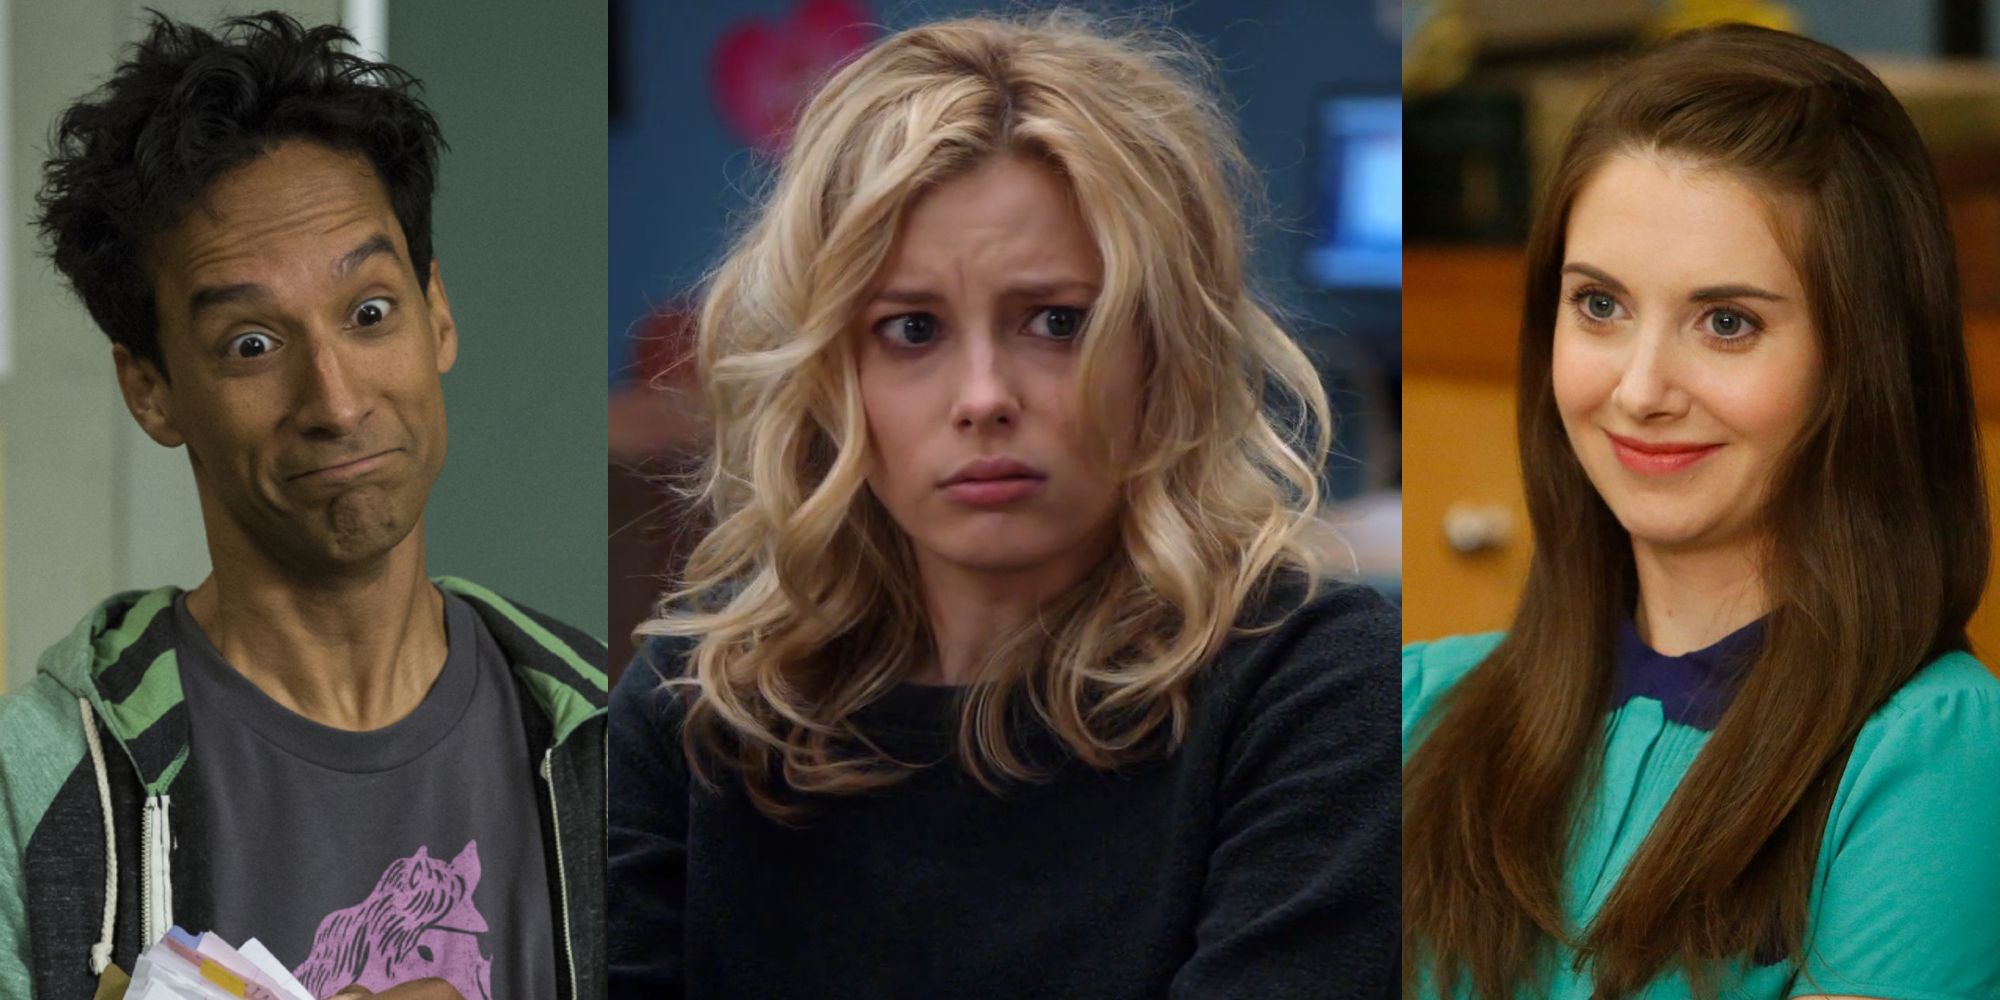 A disheveled Abed in season 5 of Community; a hungover Britta in season 1 of Community; Annie in season 5 of Community